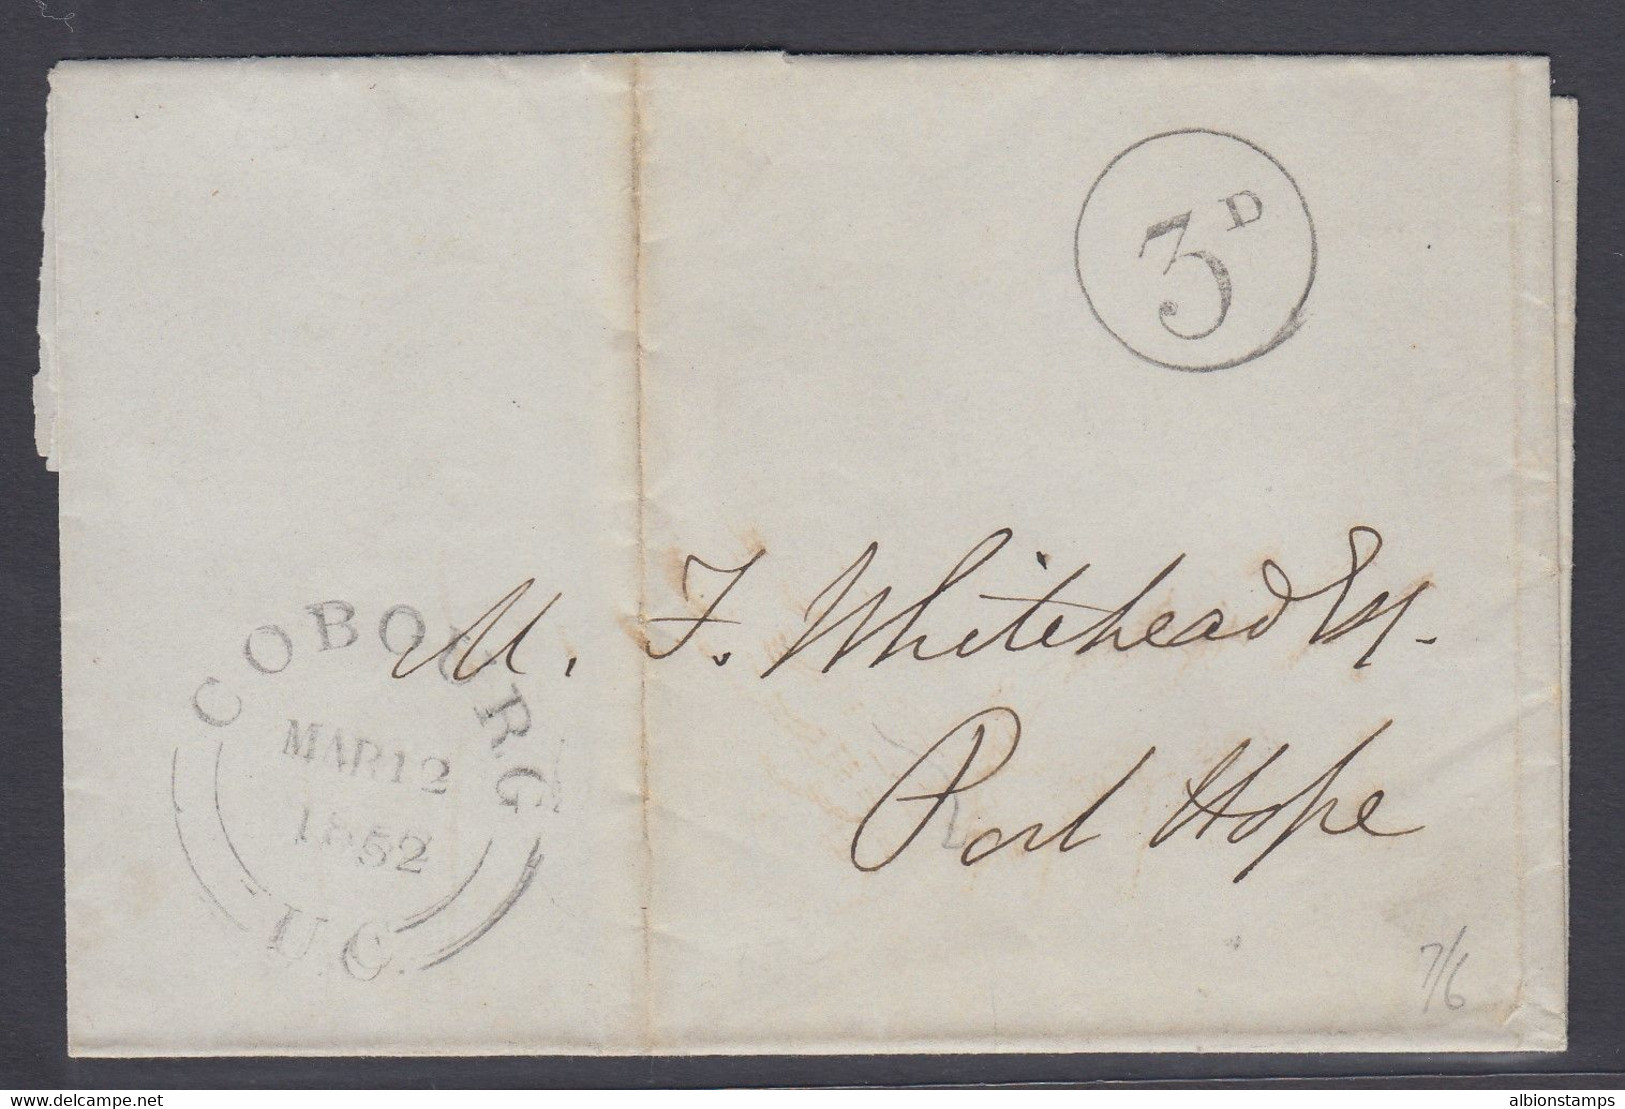 Canada 1852 Stampless Folded Cover, Cobourg And "3d" To Port Hope - ...-1851 Prephilately